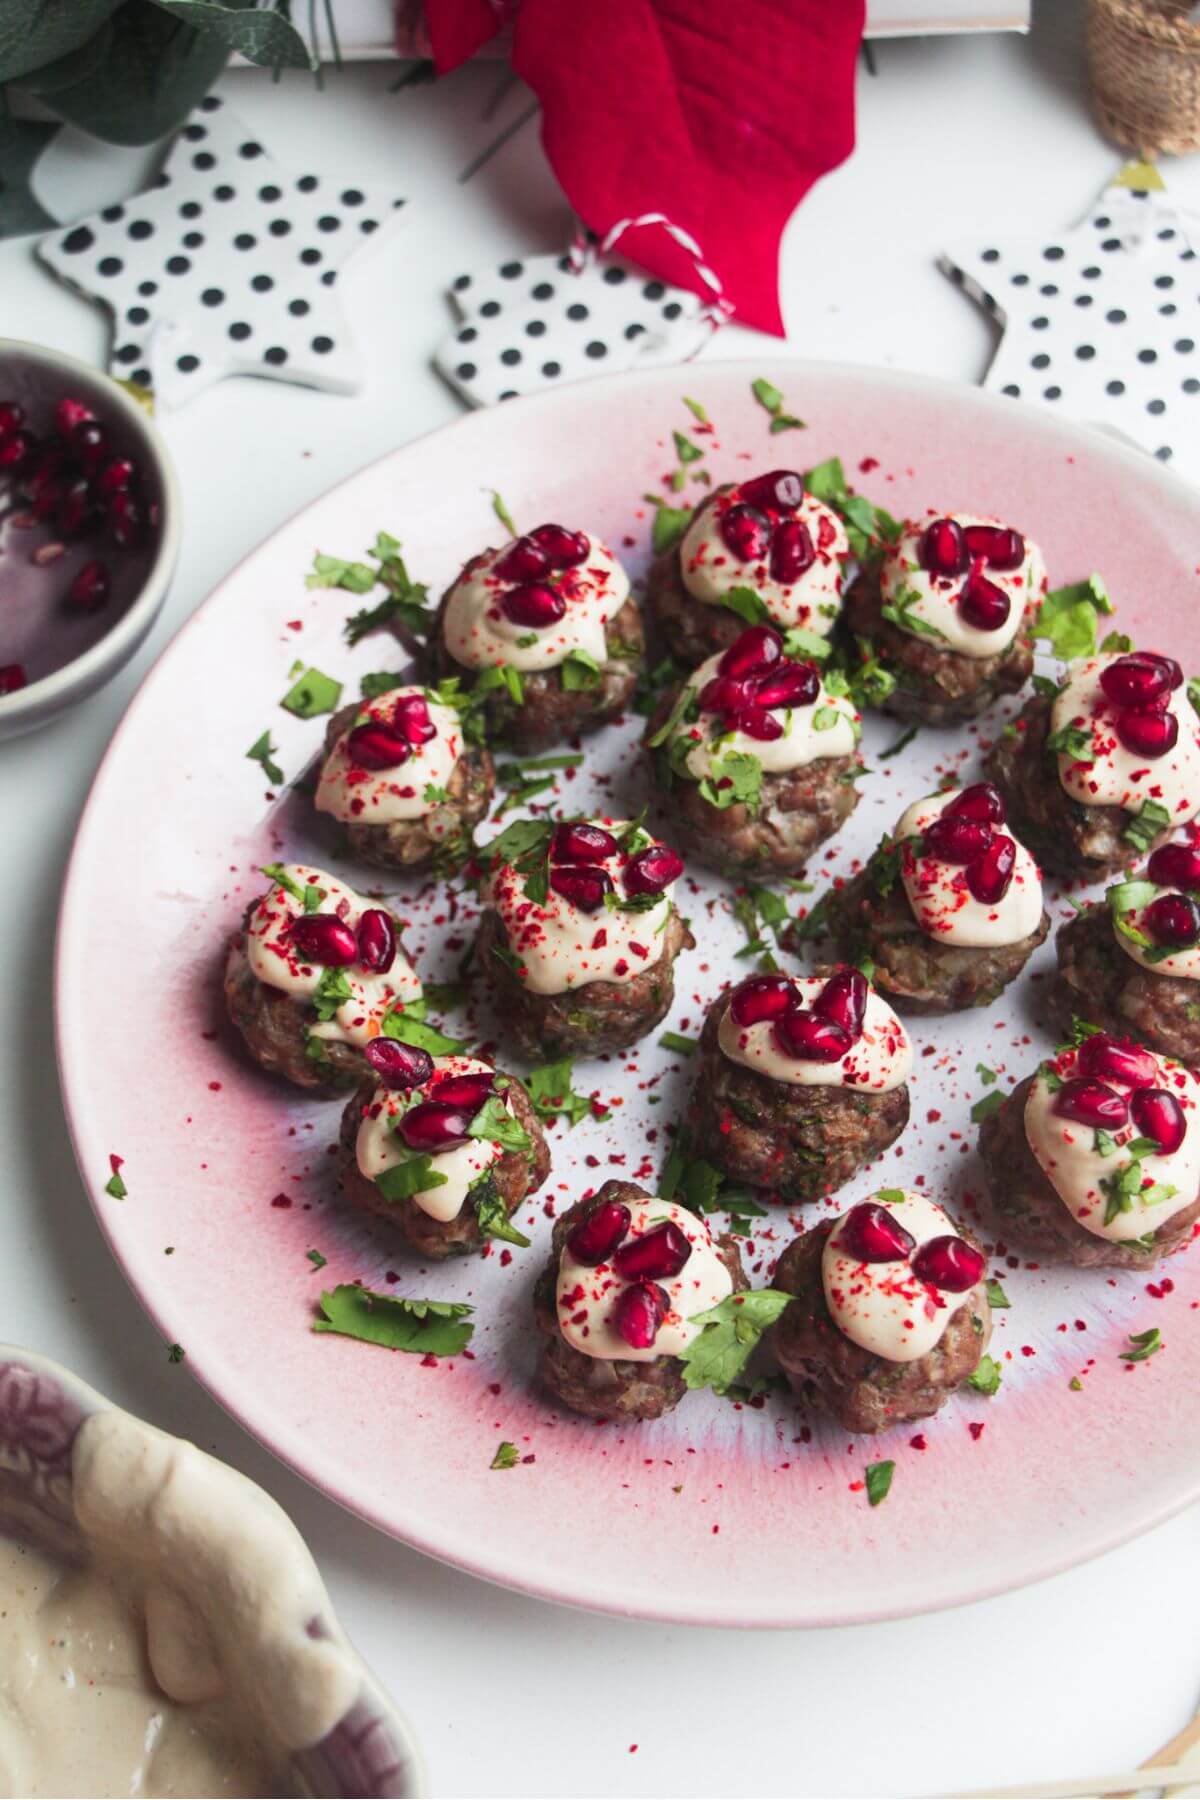 Decorated lamb meatballs on a small pink plate.